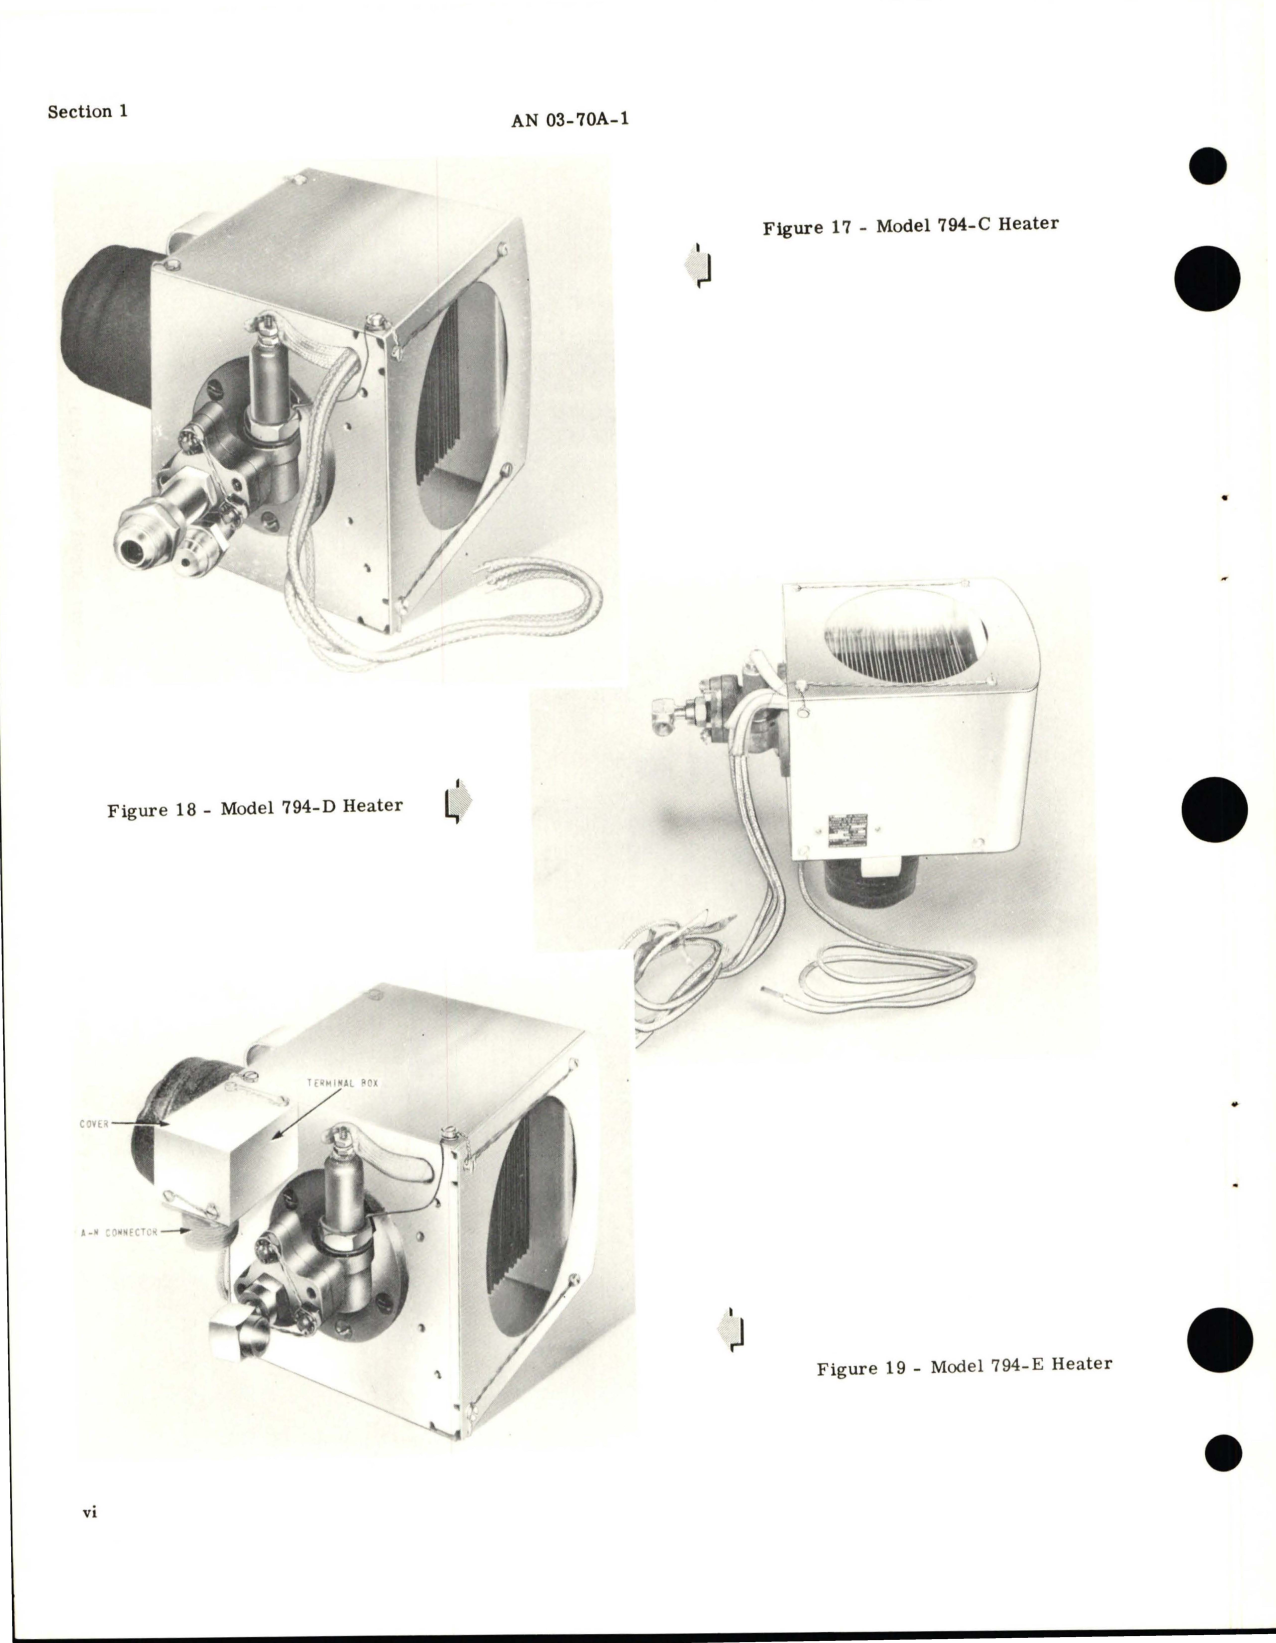 Sample page 8 from AirCorps Library document: Handbook of Instructions with Parts Catalog for Heaters 